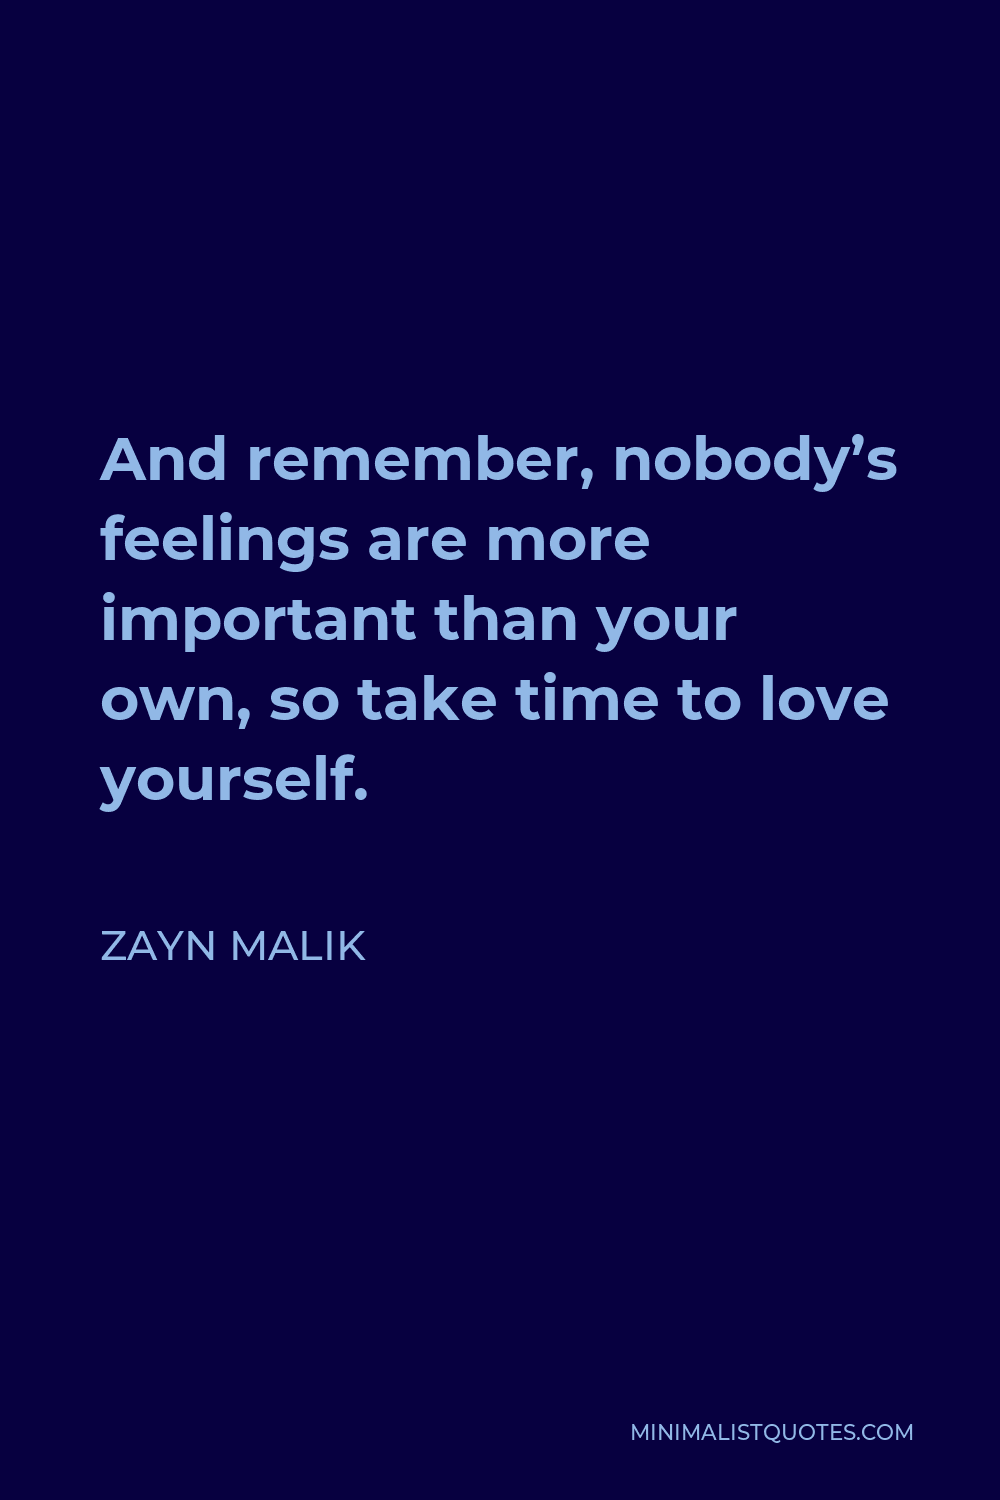 Zayn Malik Quote - And remember, nobody’s feelings are more important than your own, so take time to love yourself.